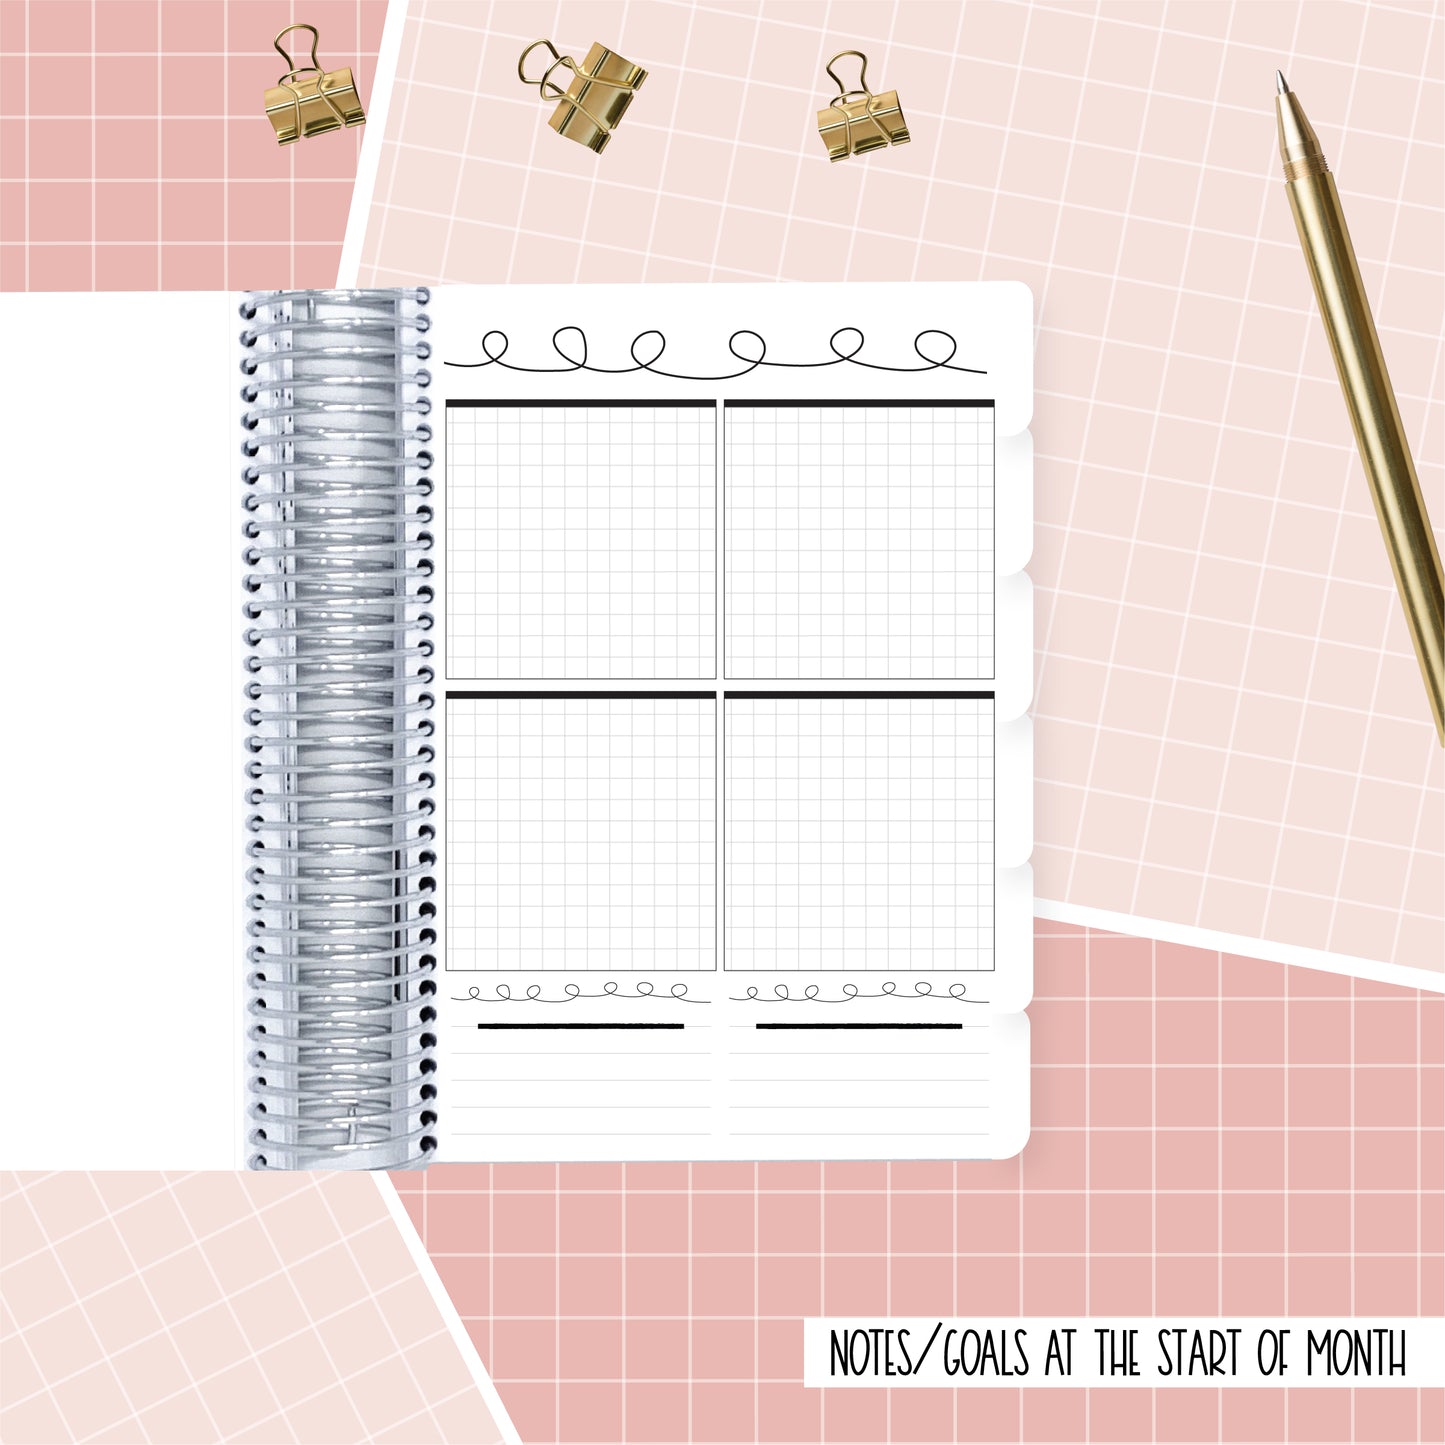 No Dream is too Big - A5 - Health & Food Log Daily Planner